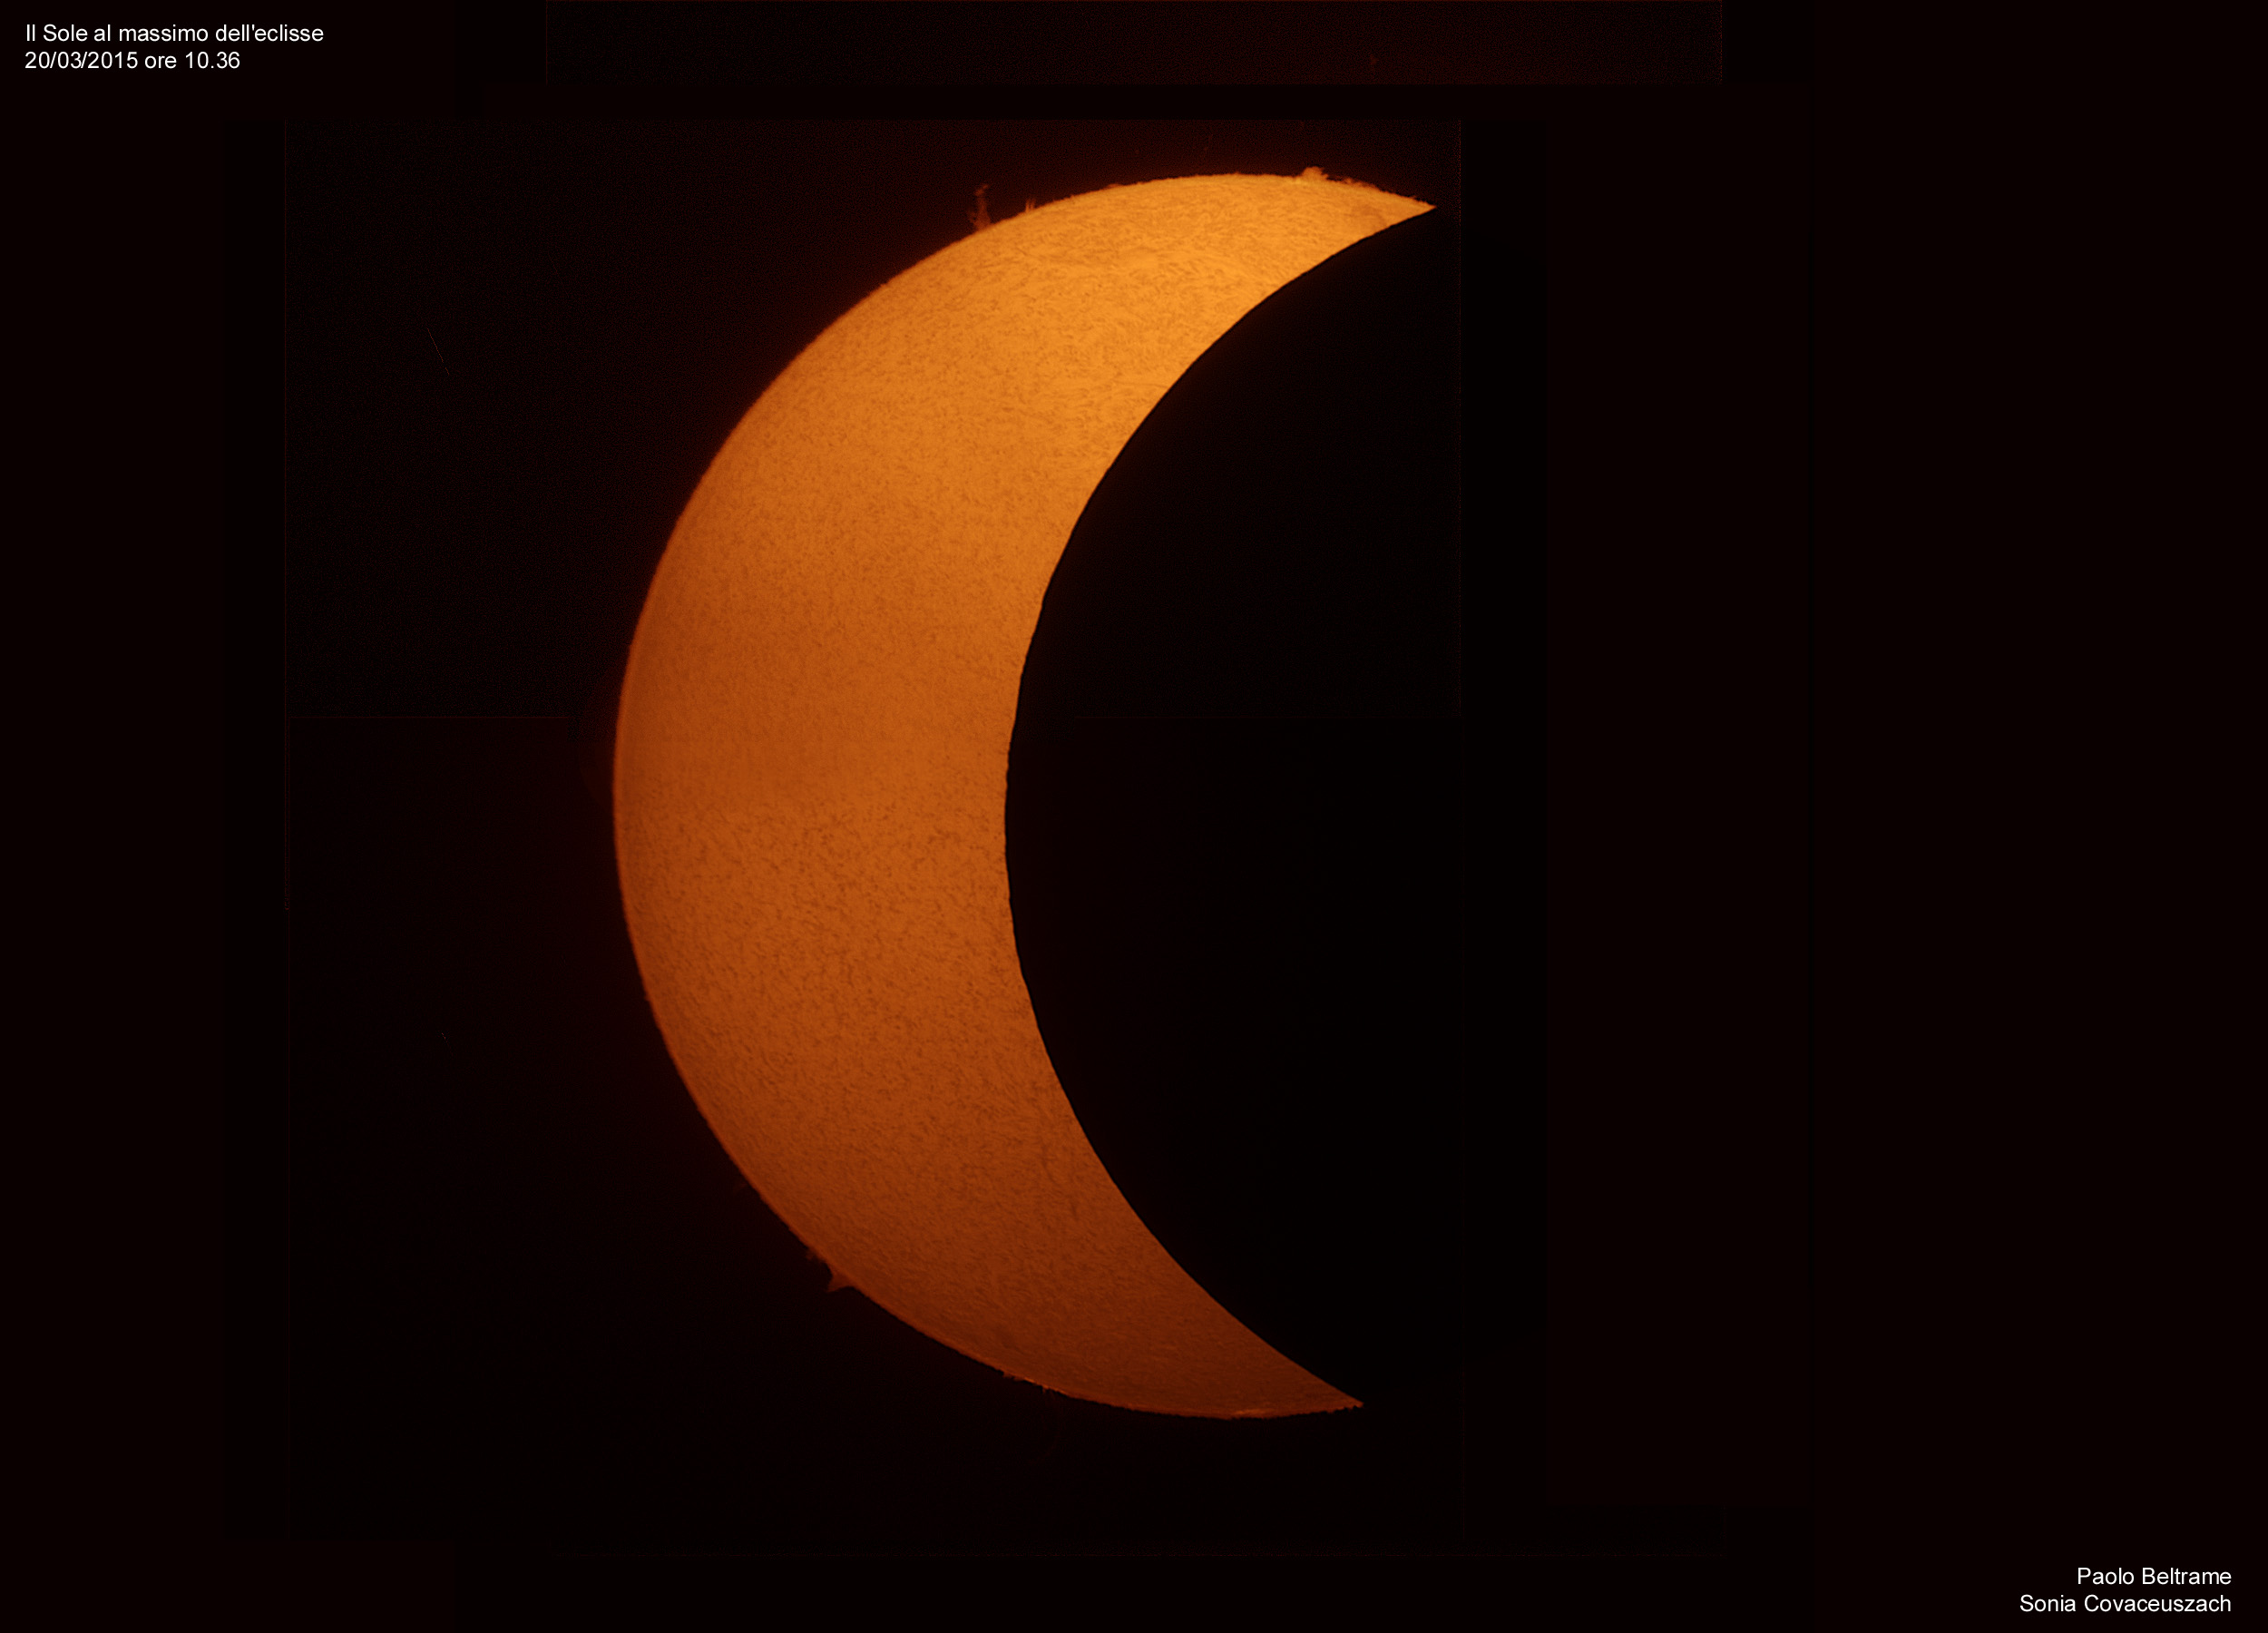 Partial eclipse photographed from Talmassons: 543 KB; click on the image to enlarge